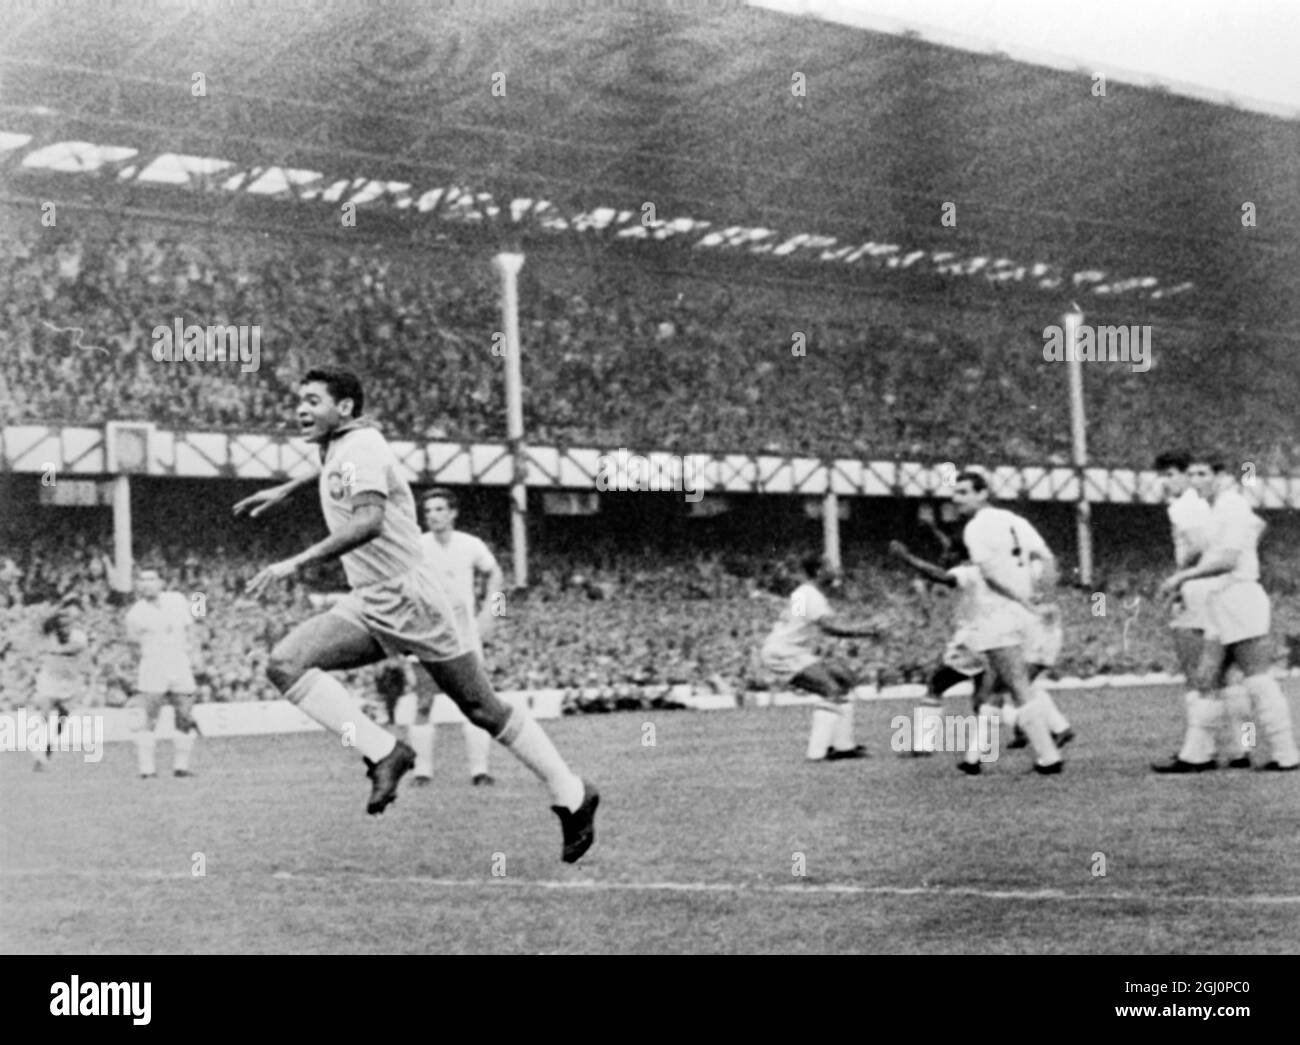 Brazil's first goal , and and jubilant Brazilians , with their player Garrincha (left) rush forward , watched by white clad despondent Bulgarians , Goodison Park , Liverpool , England , home of the Everton Football club at Liverpool . Brazil beat Bulgaria two goals to zero tonight in the opening game of group three play at the World Soccer championship . Pele and Garrincha scored for Brazil . 12 July 1966 Stock Photo